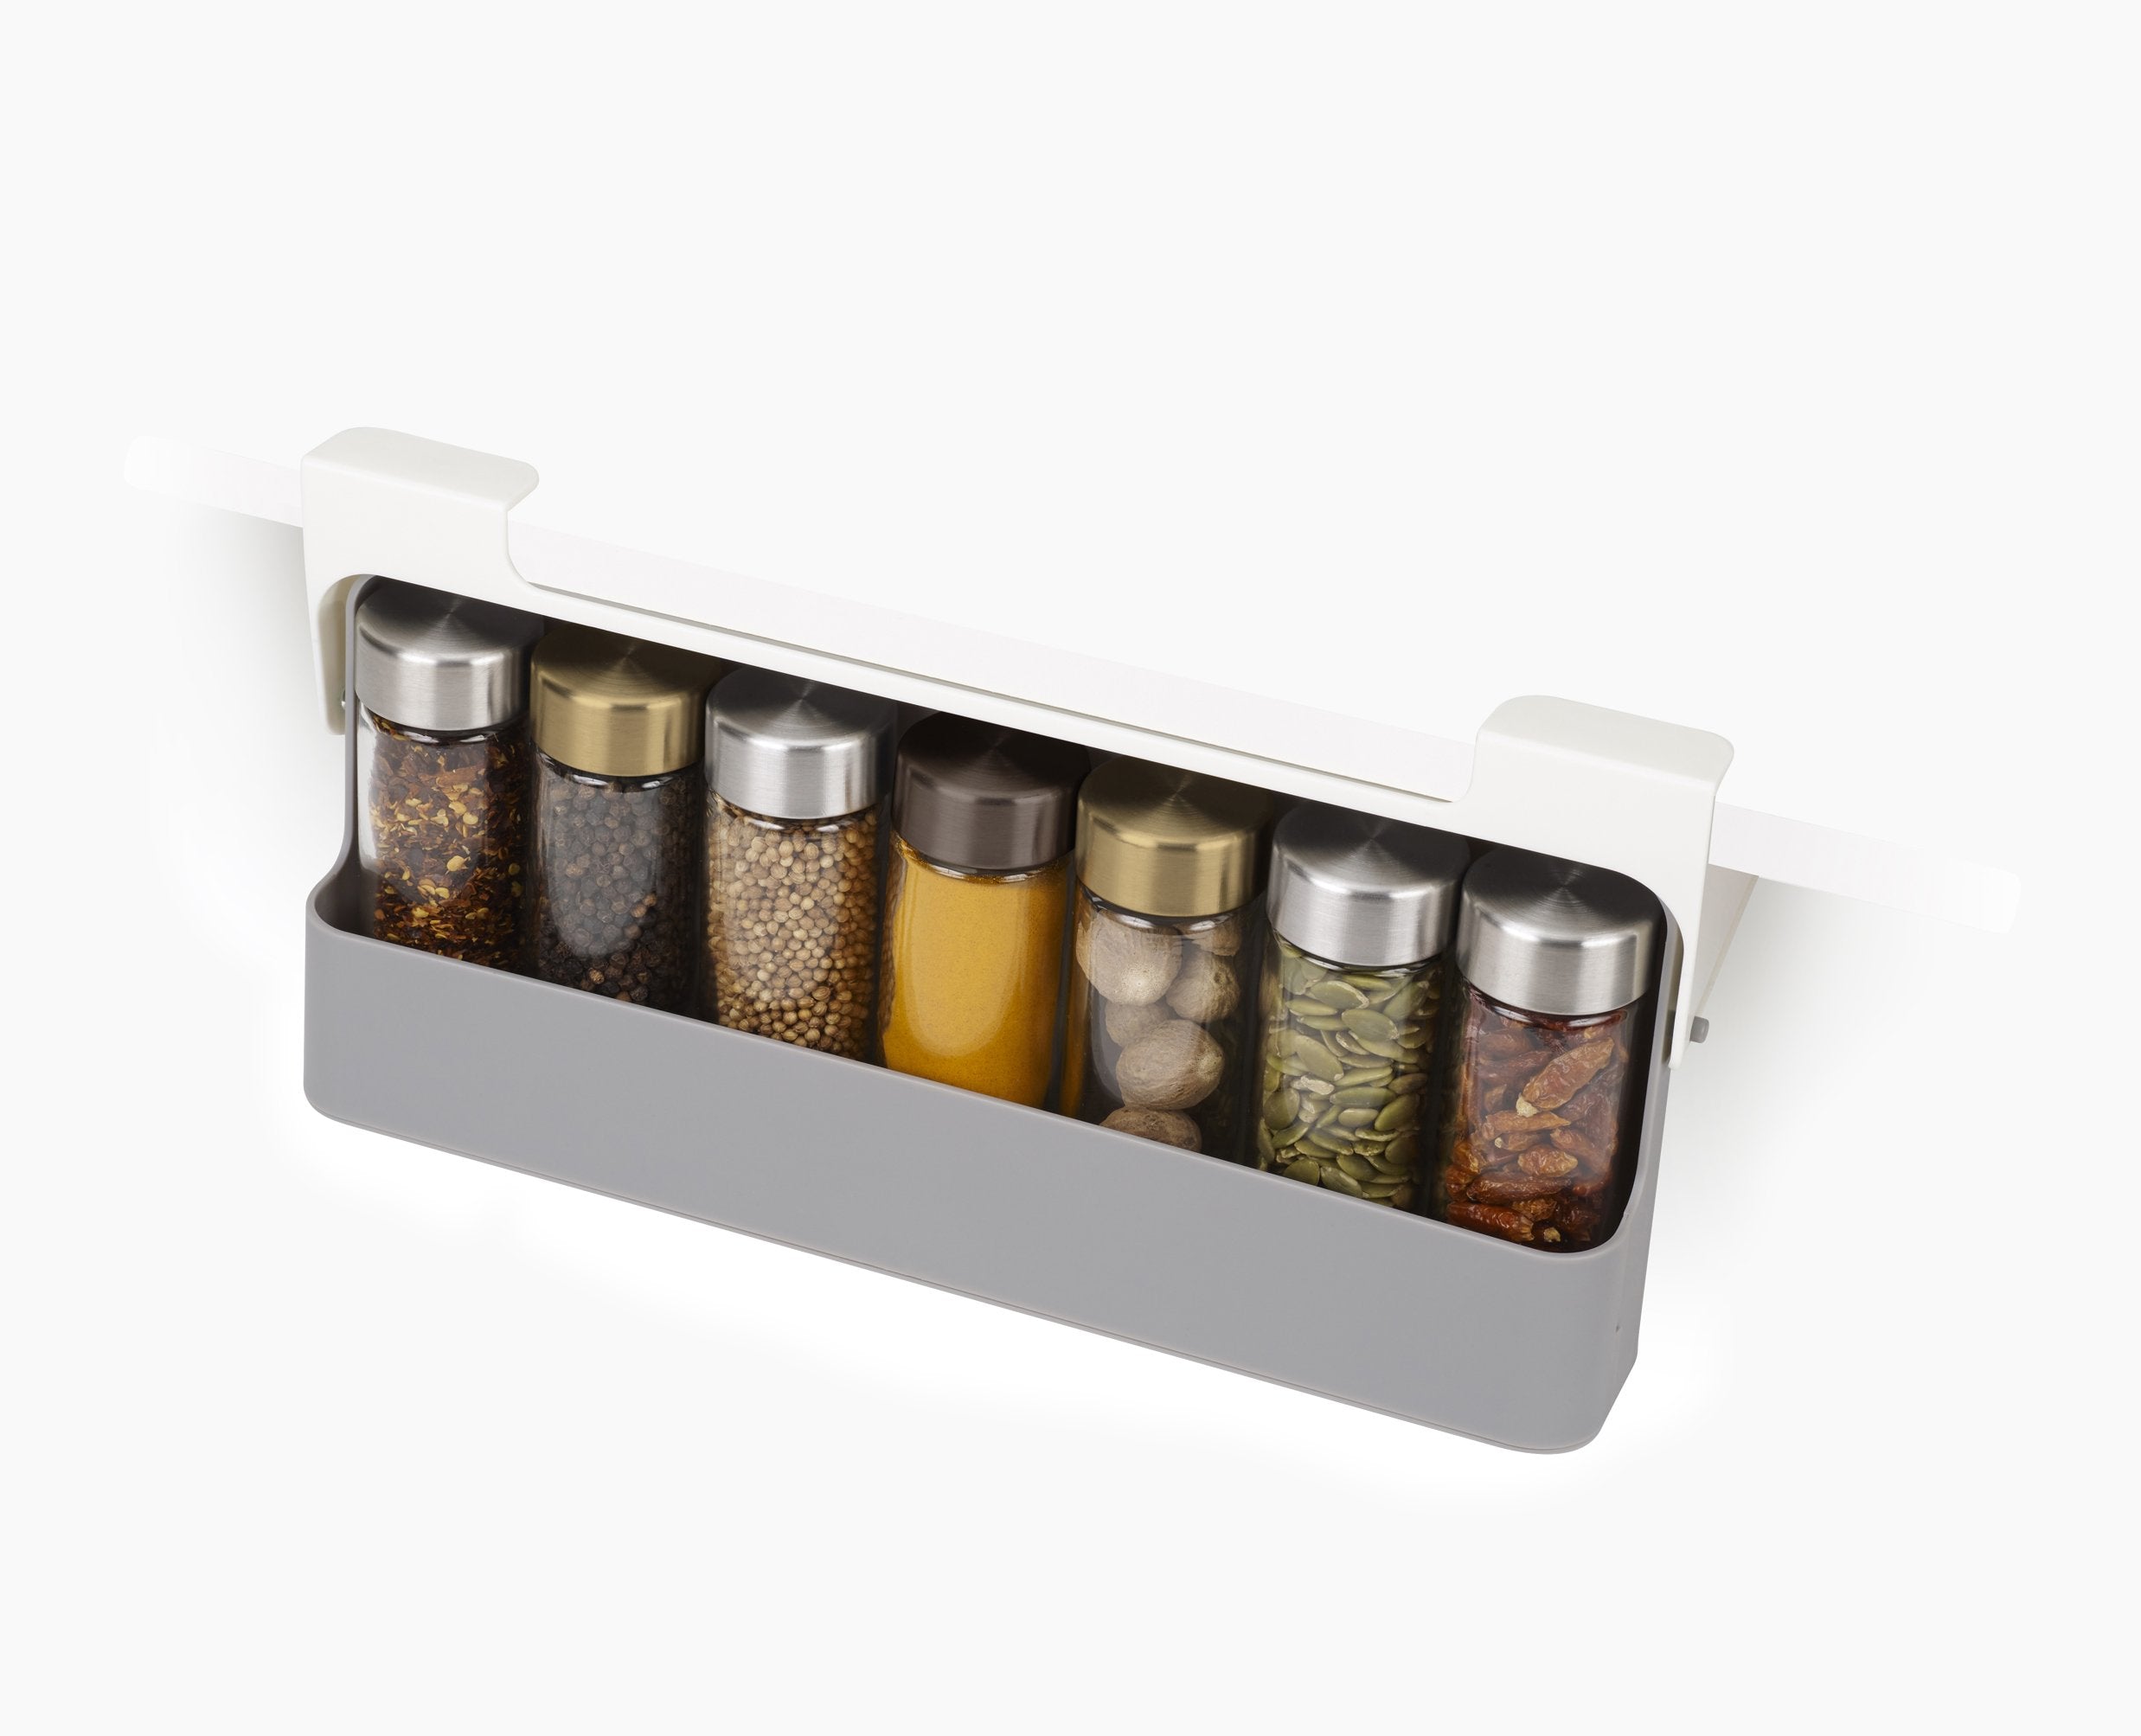 BEON.COM.AU  This innovative design makes use of the space beneath your shelves that would normally go unused with a handy pull-out compartment that holds up to 7 spice jars.  Unique design utilises unused space beneath the shelf Easy pull-out compartment with drawer stop Holds up to 7 standard spice jars (j... Joseph Joseph at BEON.COM.AU